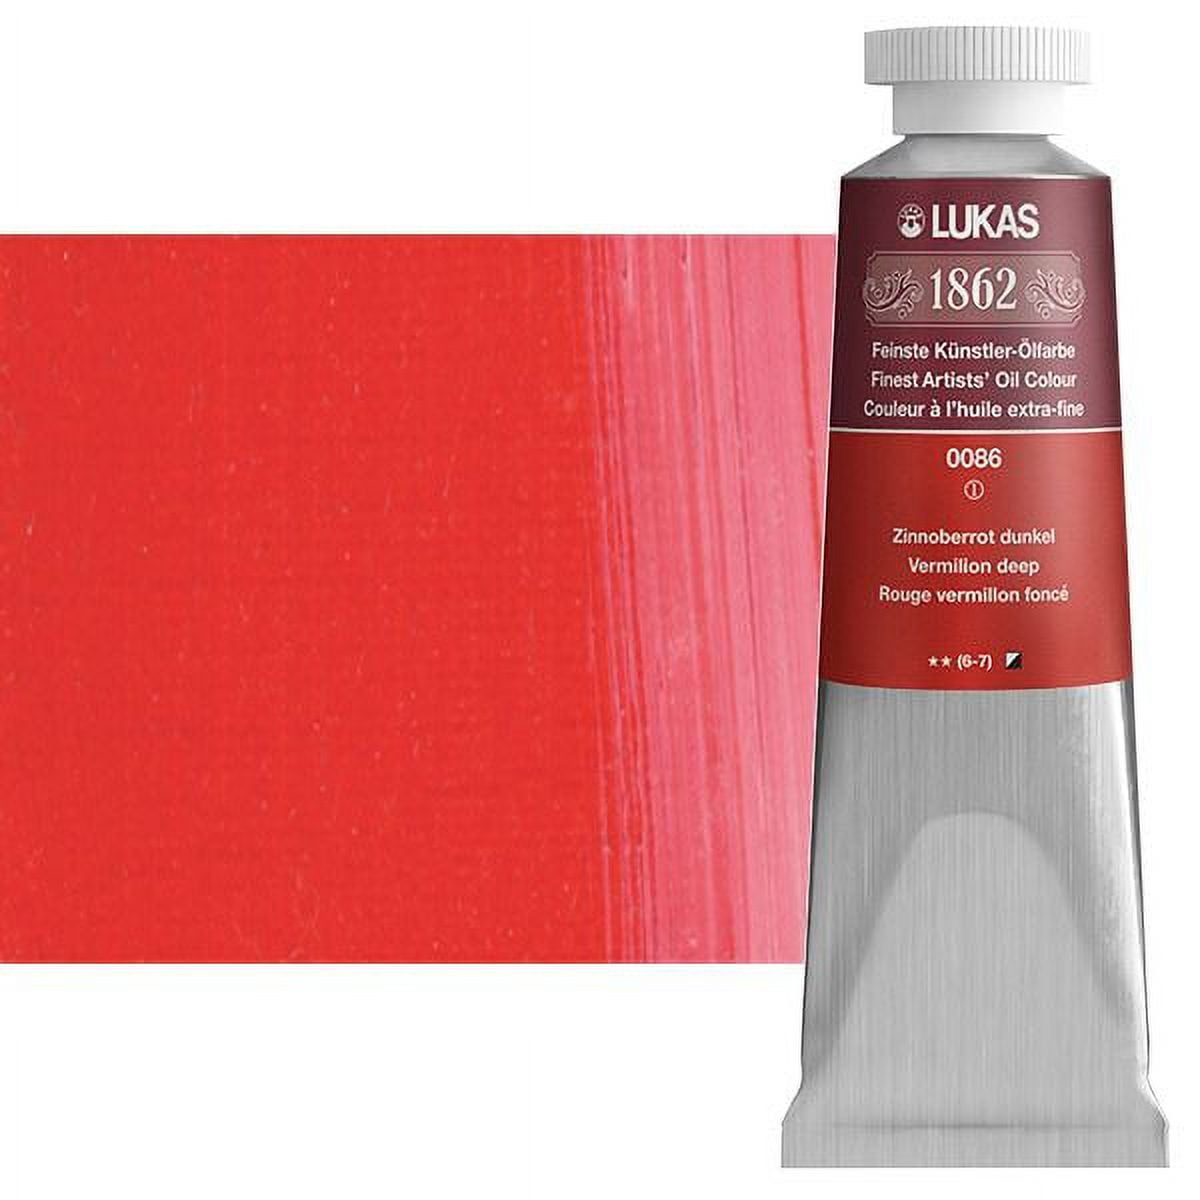 Lukas 1862 Professional Artist Oil Paint - Fast-Drying, Non-Yellowing,  Highly Pigmented Oil Paint, Titanium White, 37 mL - 2 Pack 